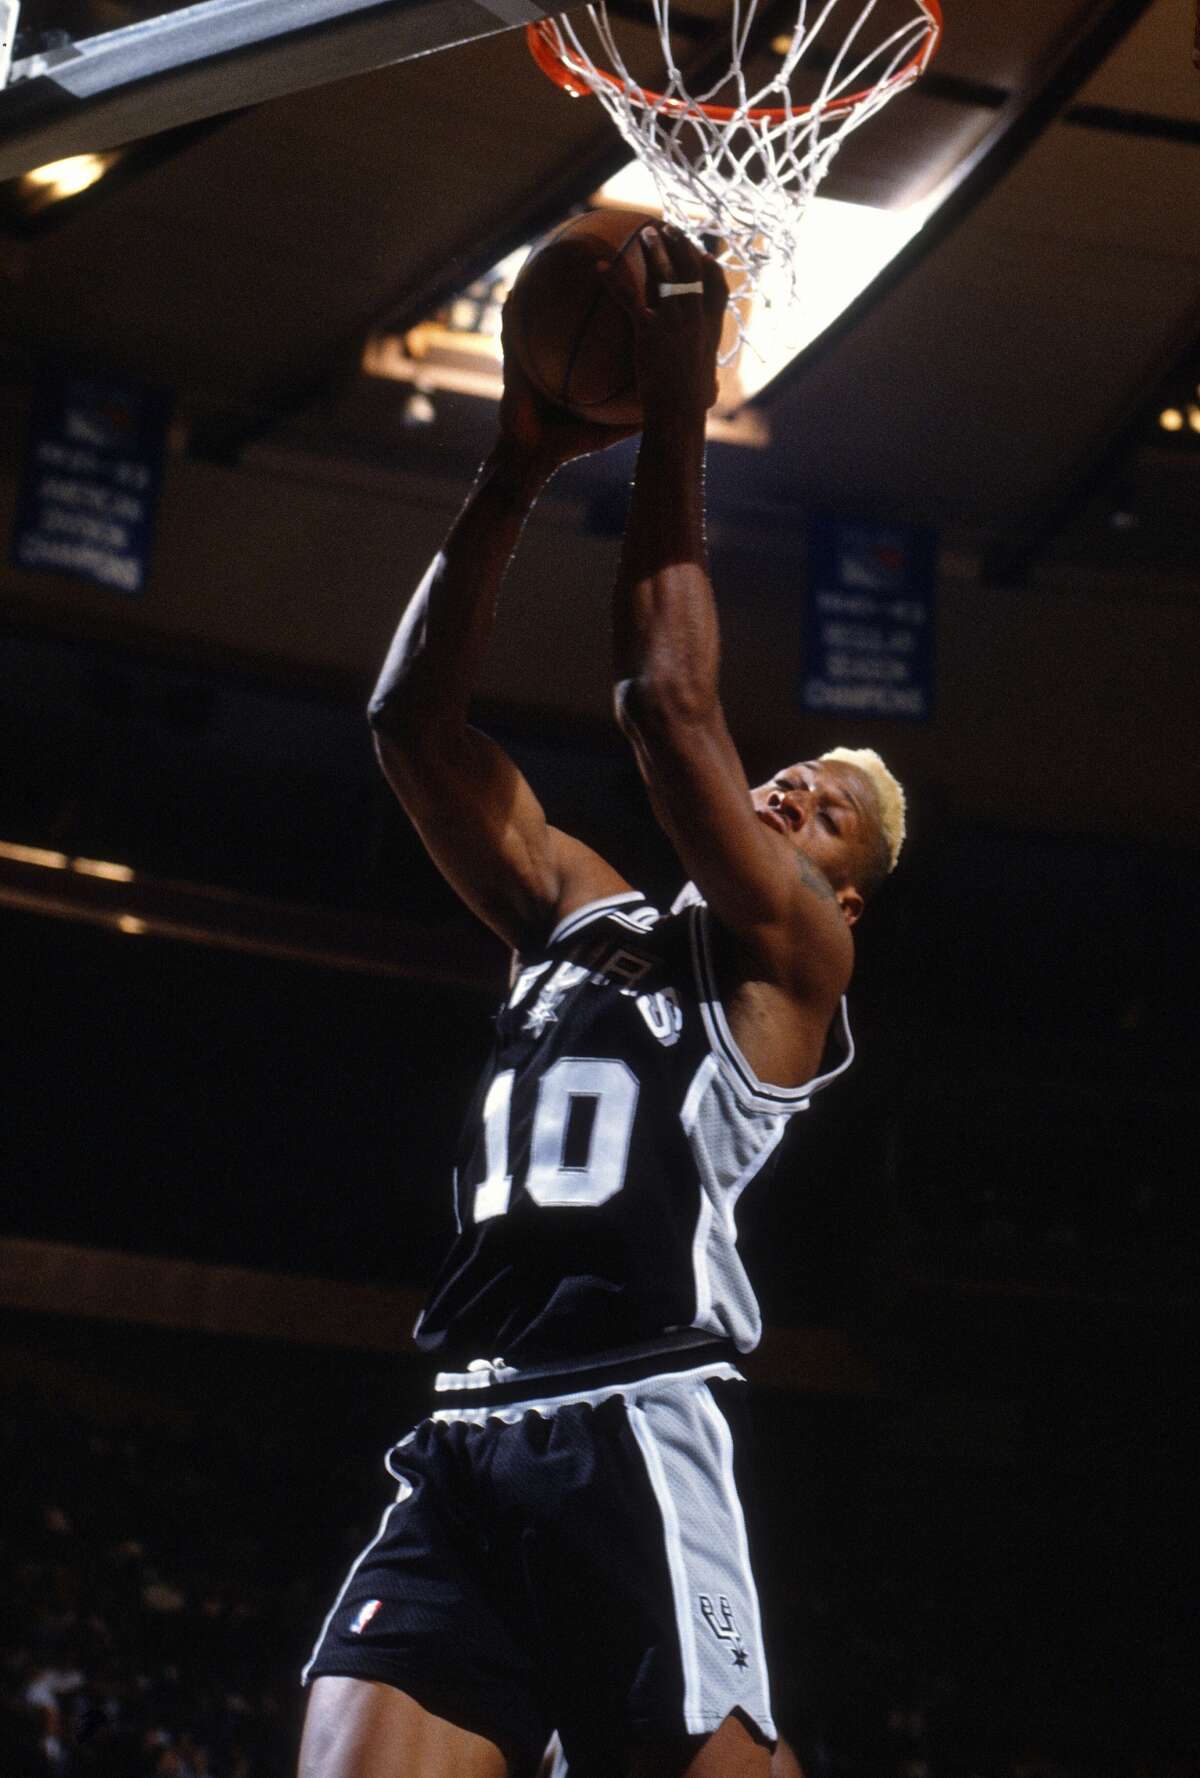 Rebounding specialist Dennis Rodman was ranked No. 64 on ESPN's list of the top 100 players in NBA history